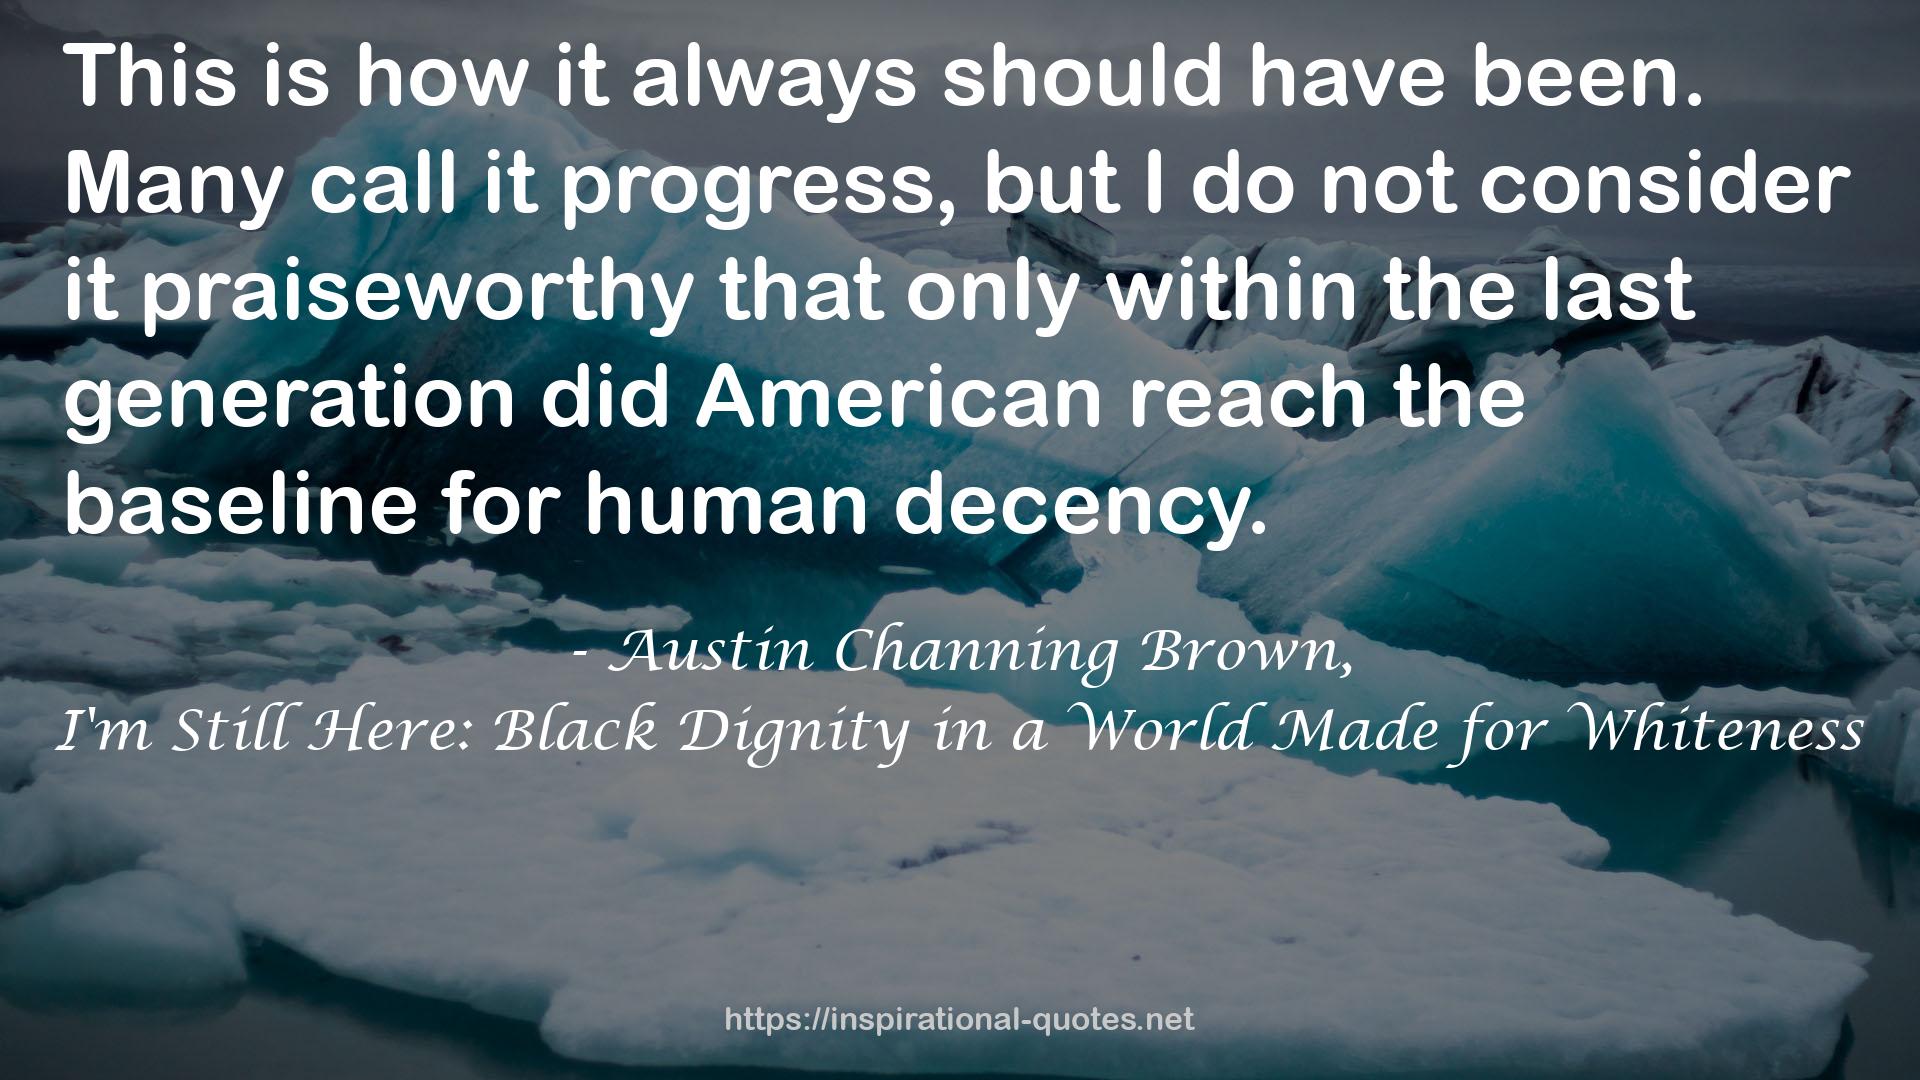 Austin Channing Brown, QUOTES